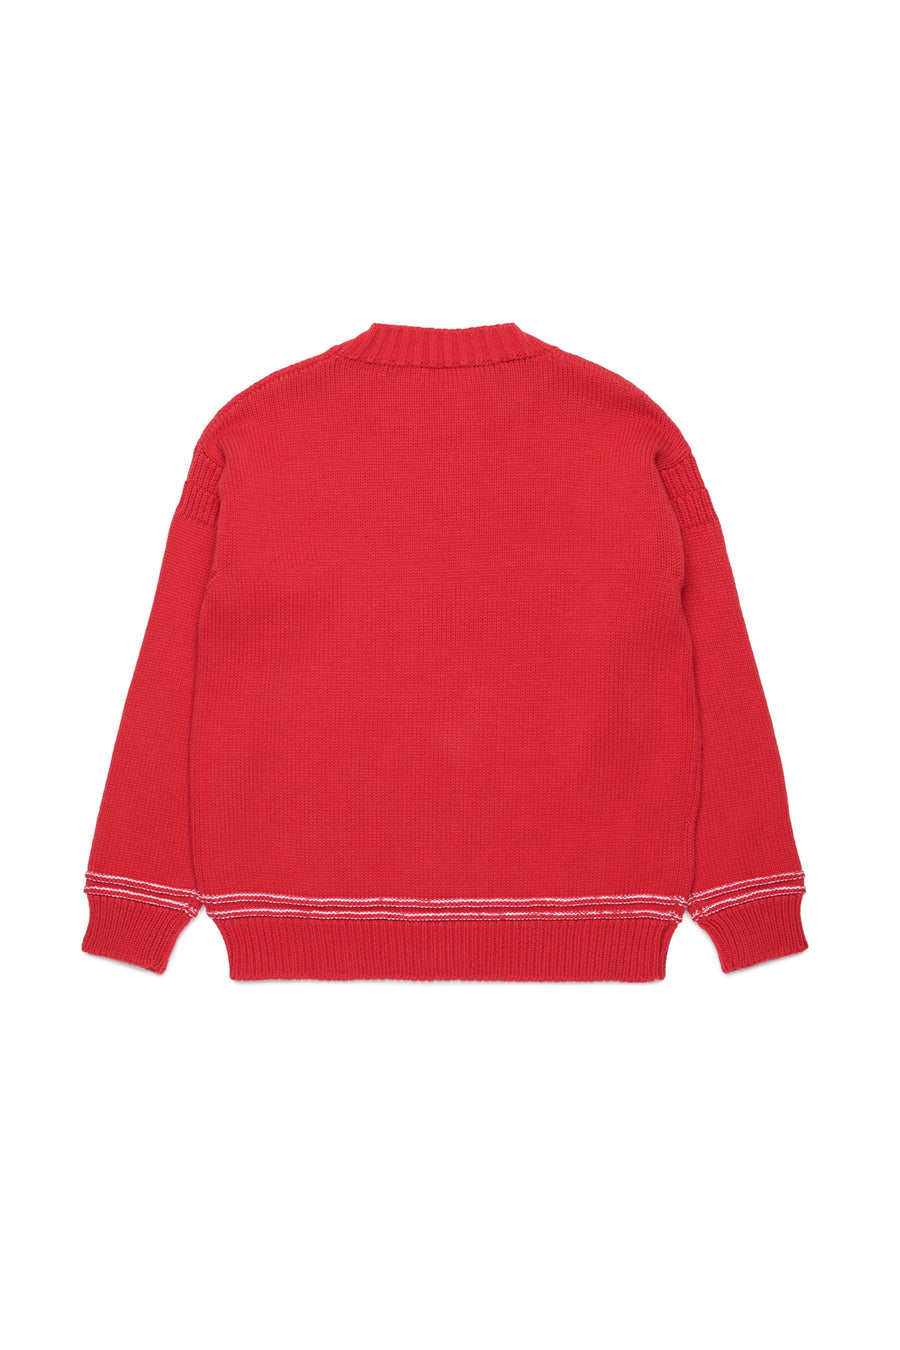 Trim red knit sweater by Marni